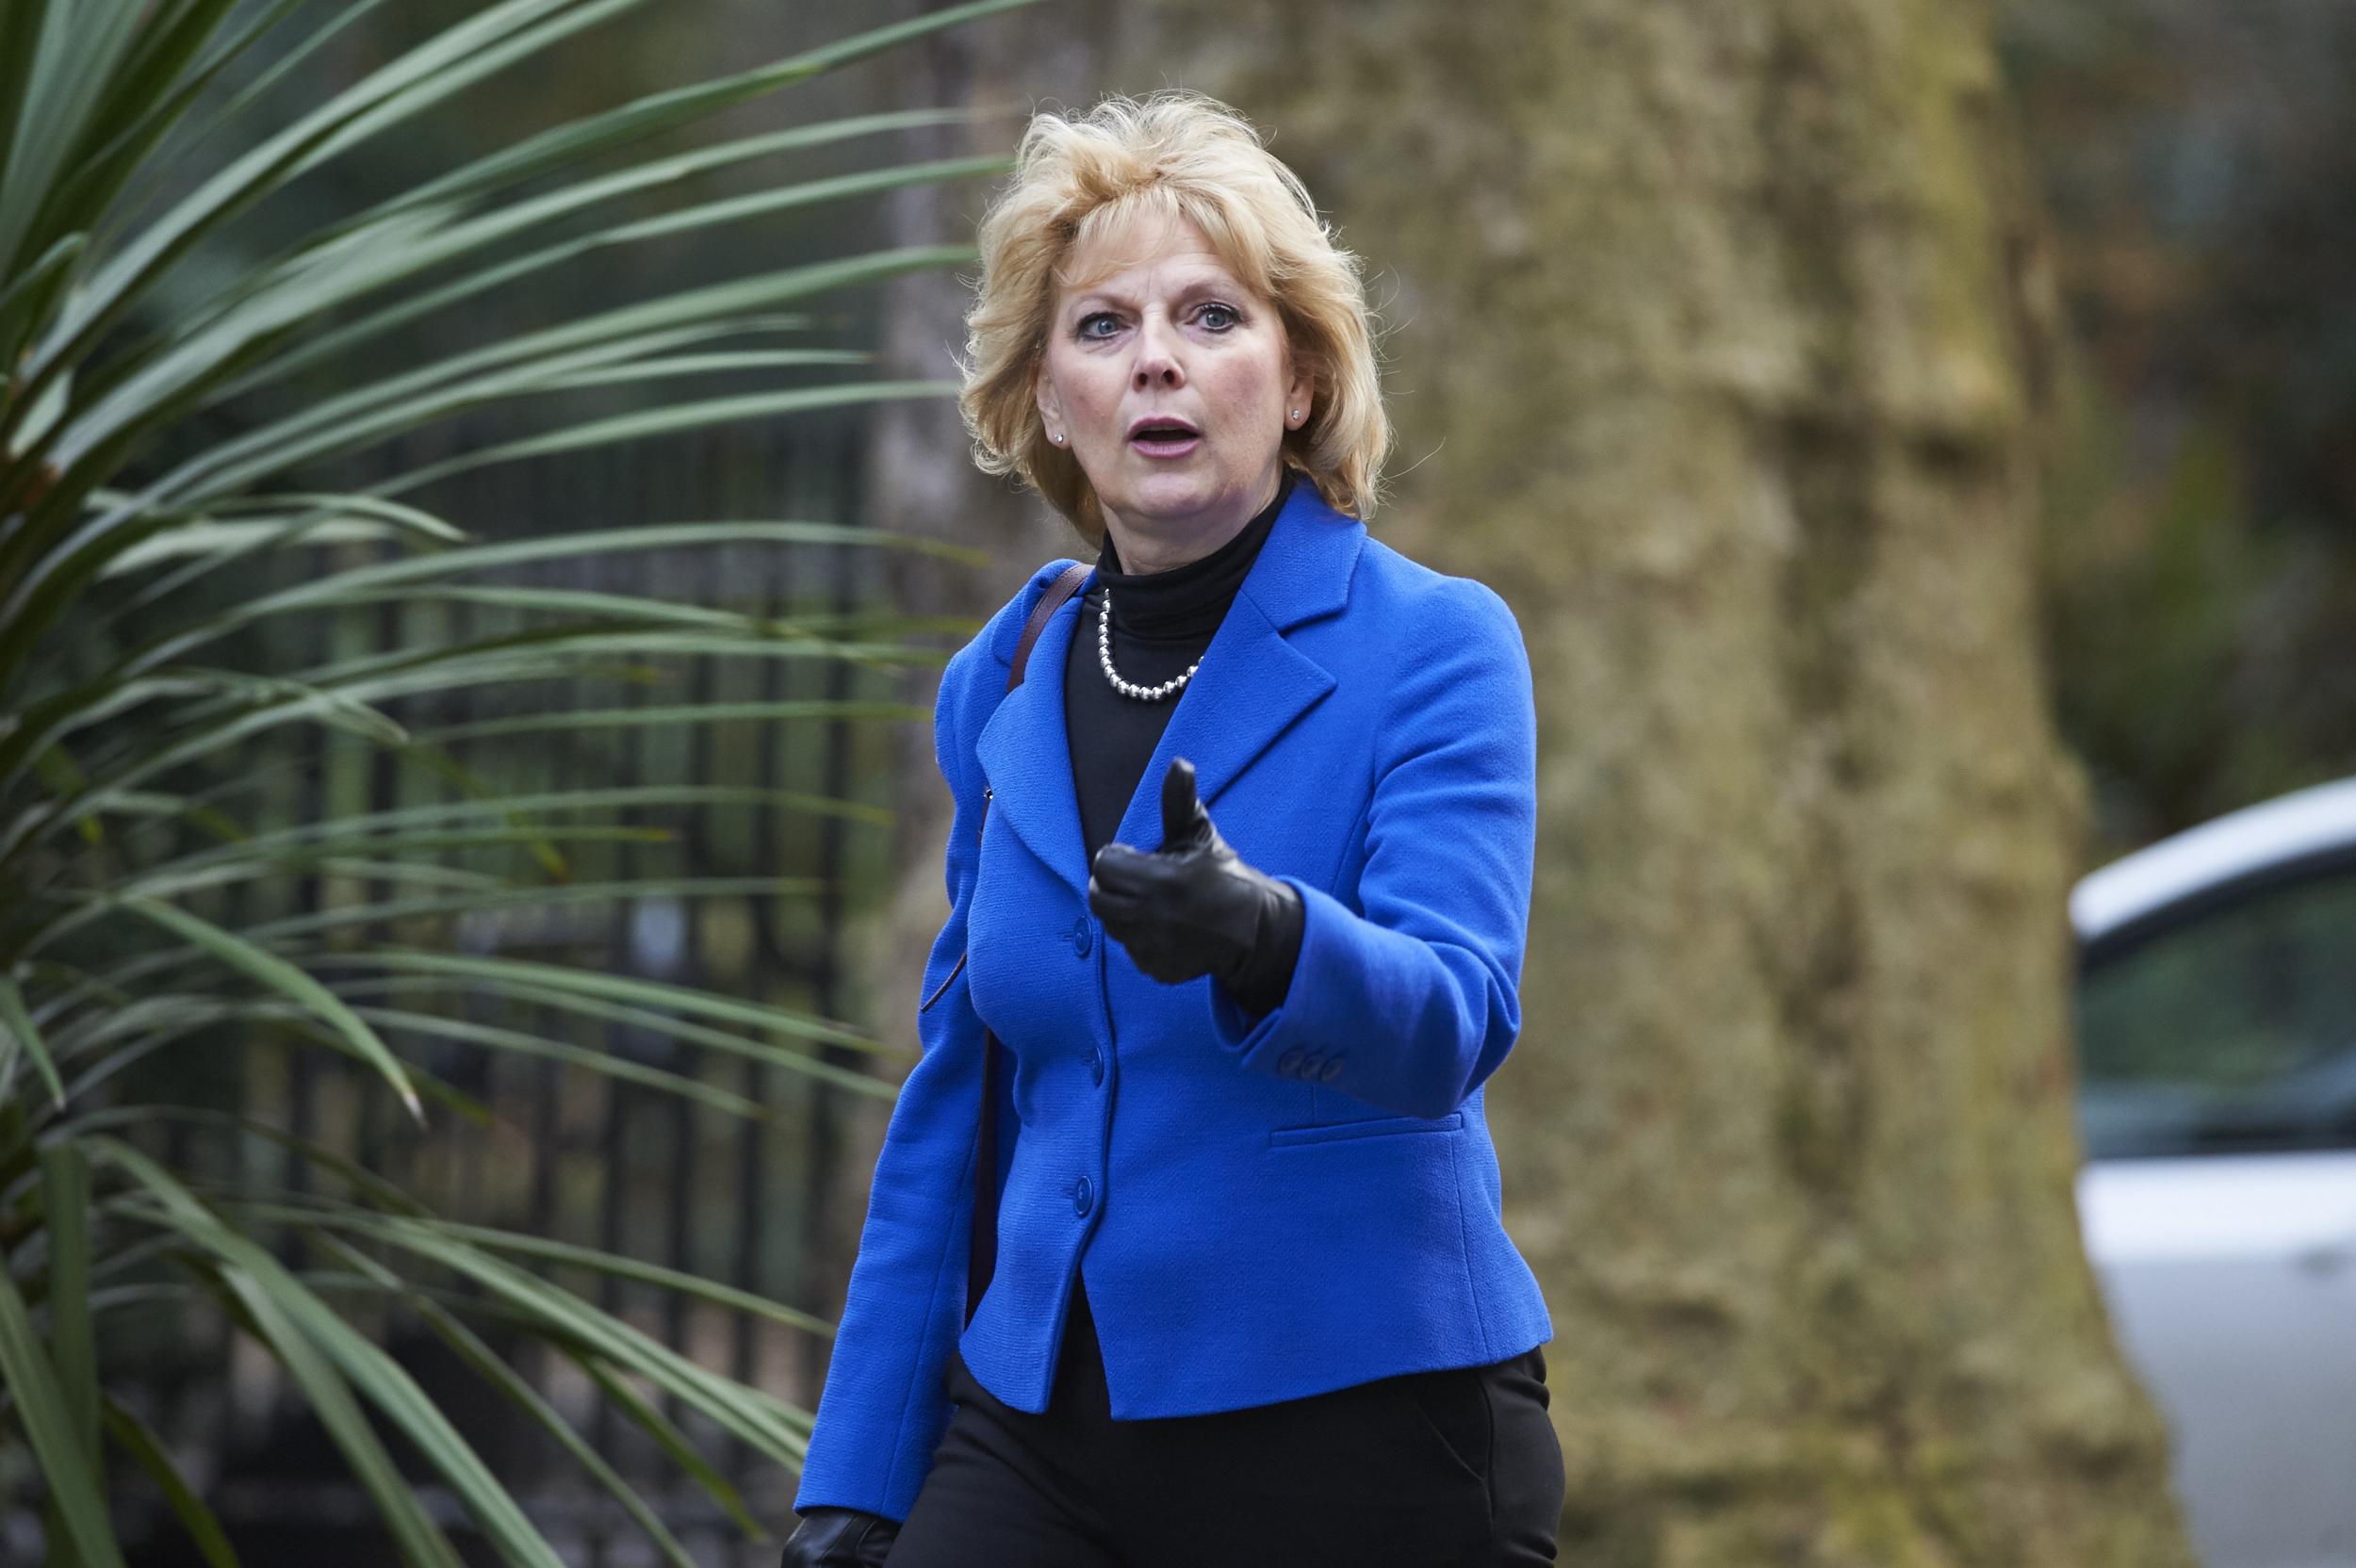 Pro-EU former minister Anna Soubry has been invited to discuss concerns with Ms May (AFP/Getty)